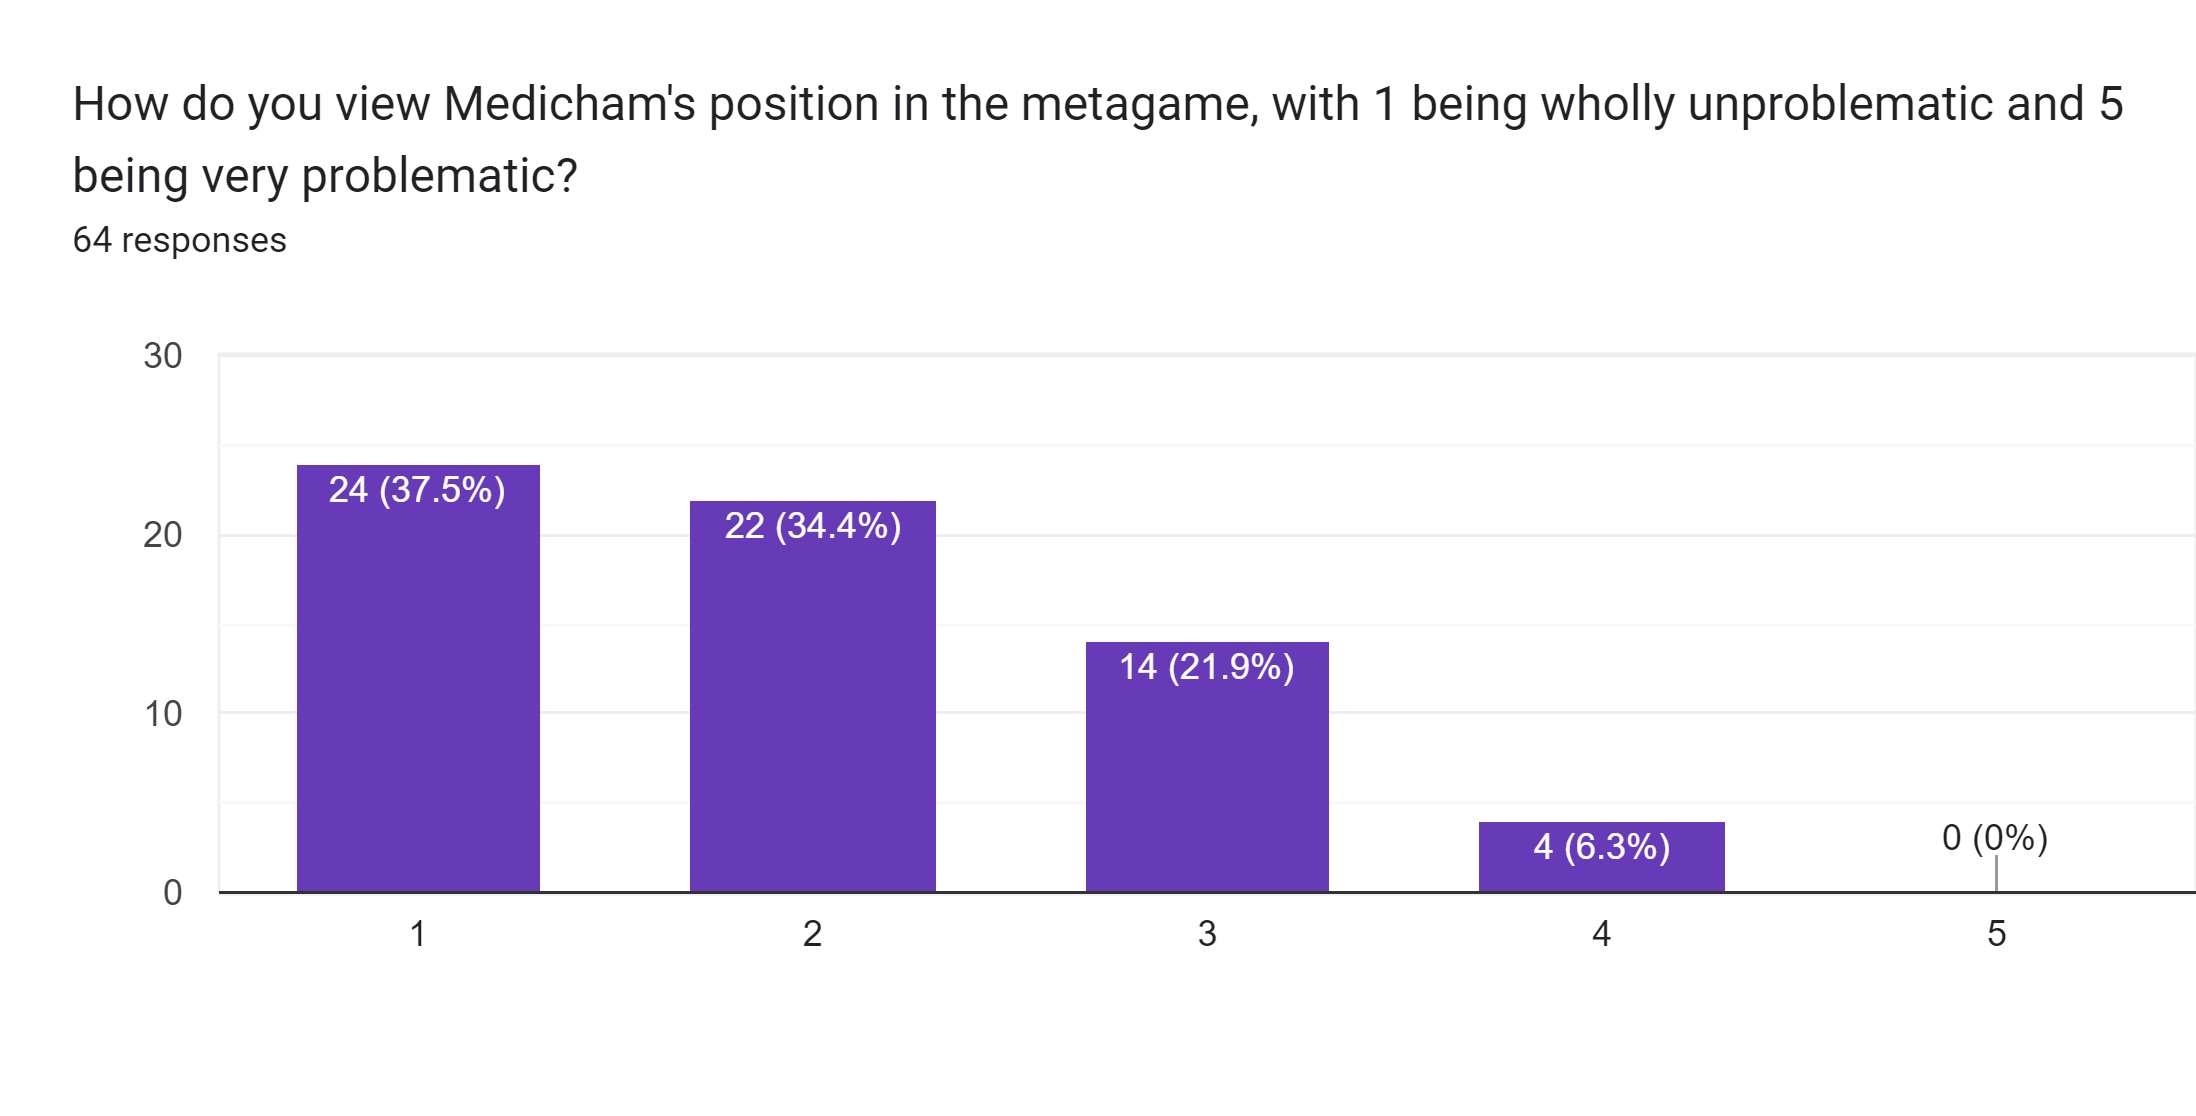 Forms response chart. Question title: How do you view Medicham's position in the metagame, with 1 being wholly unproblematic and 5 being very problematic?. Number of responses: 64 responses.